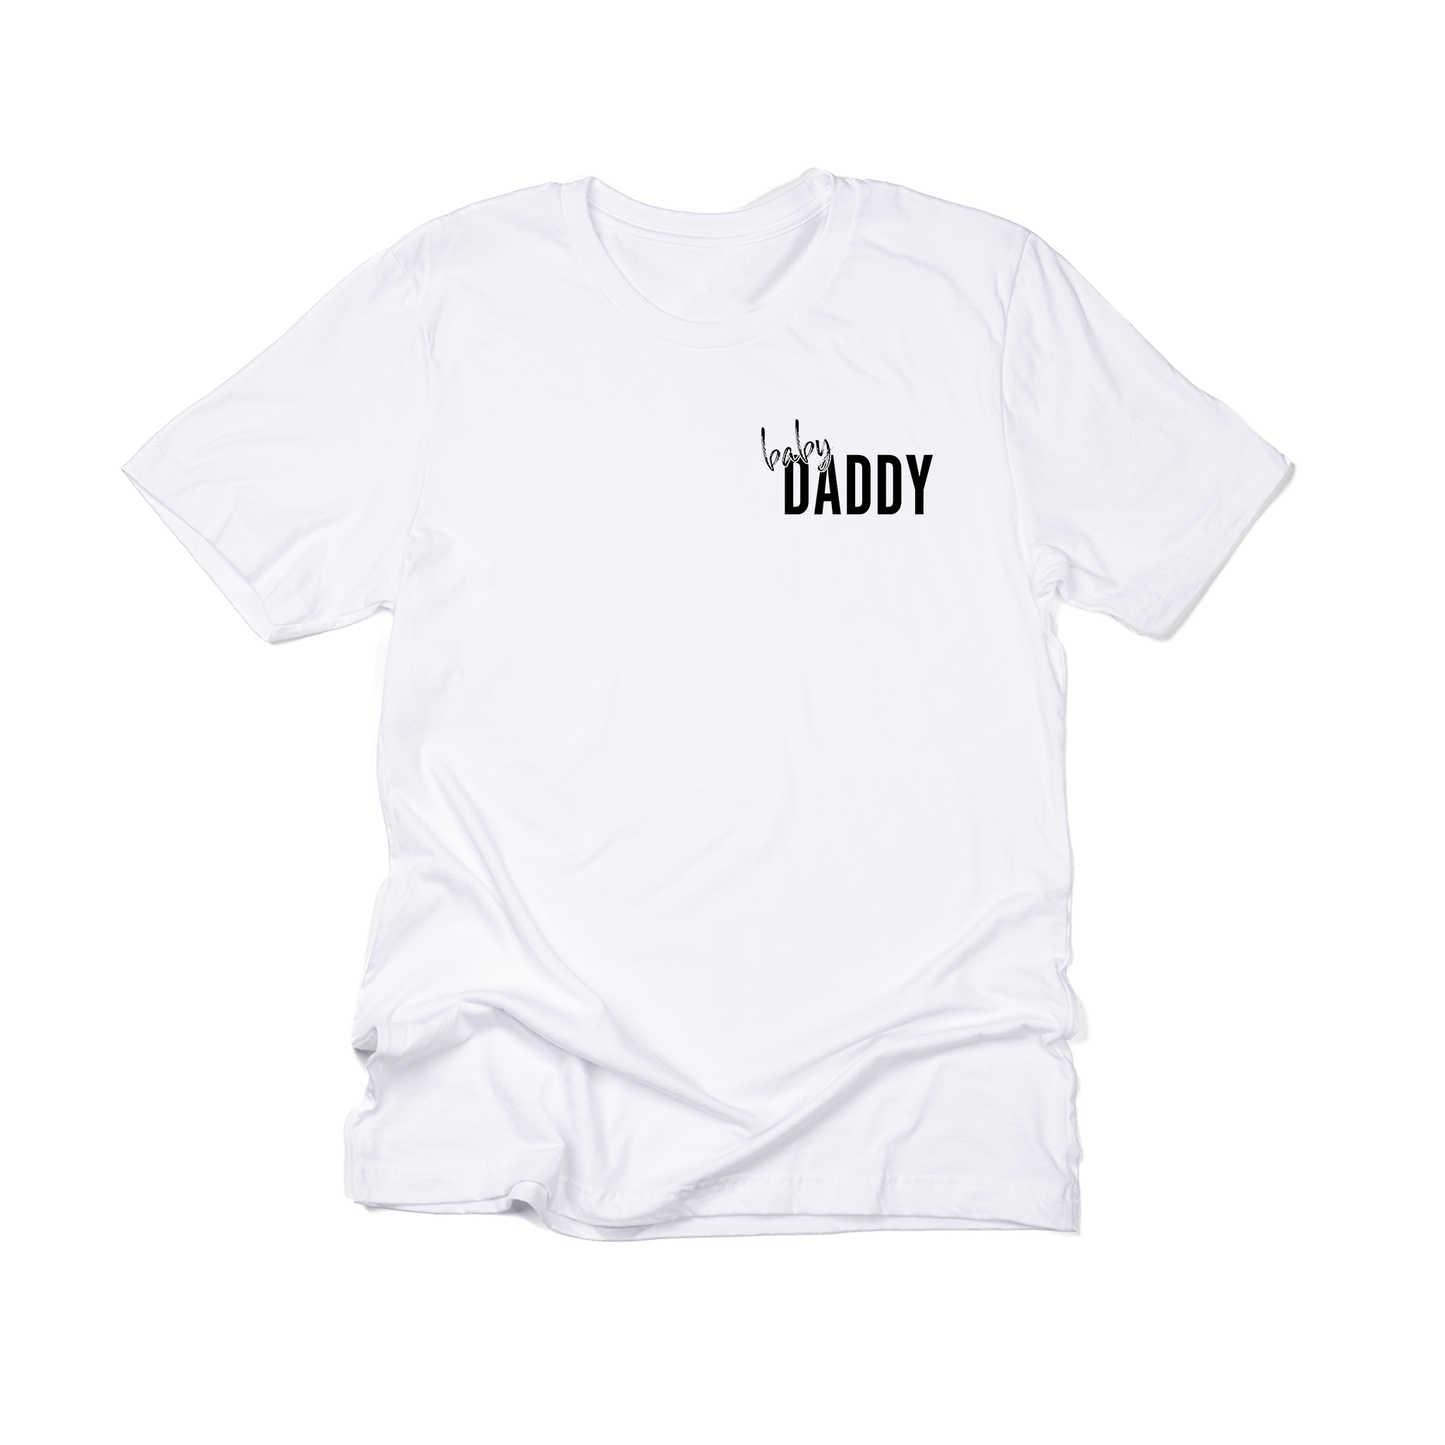 Baby Daddy (Black) - Tee (White)